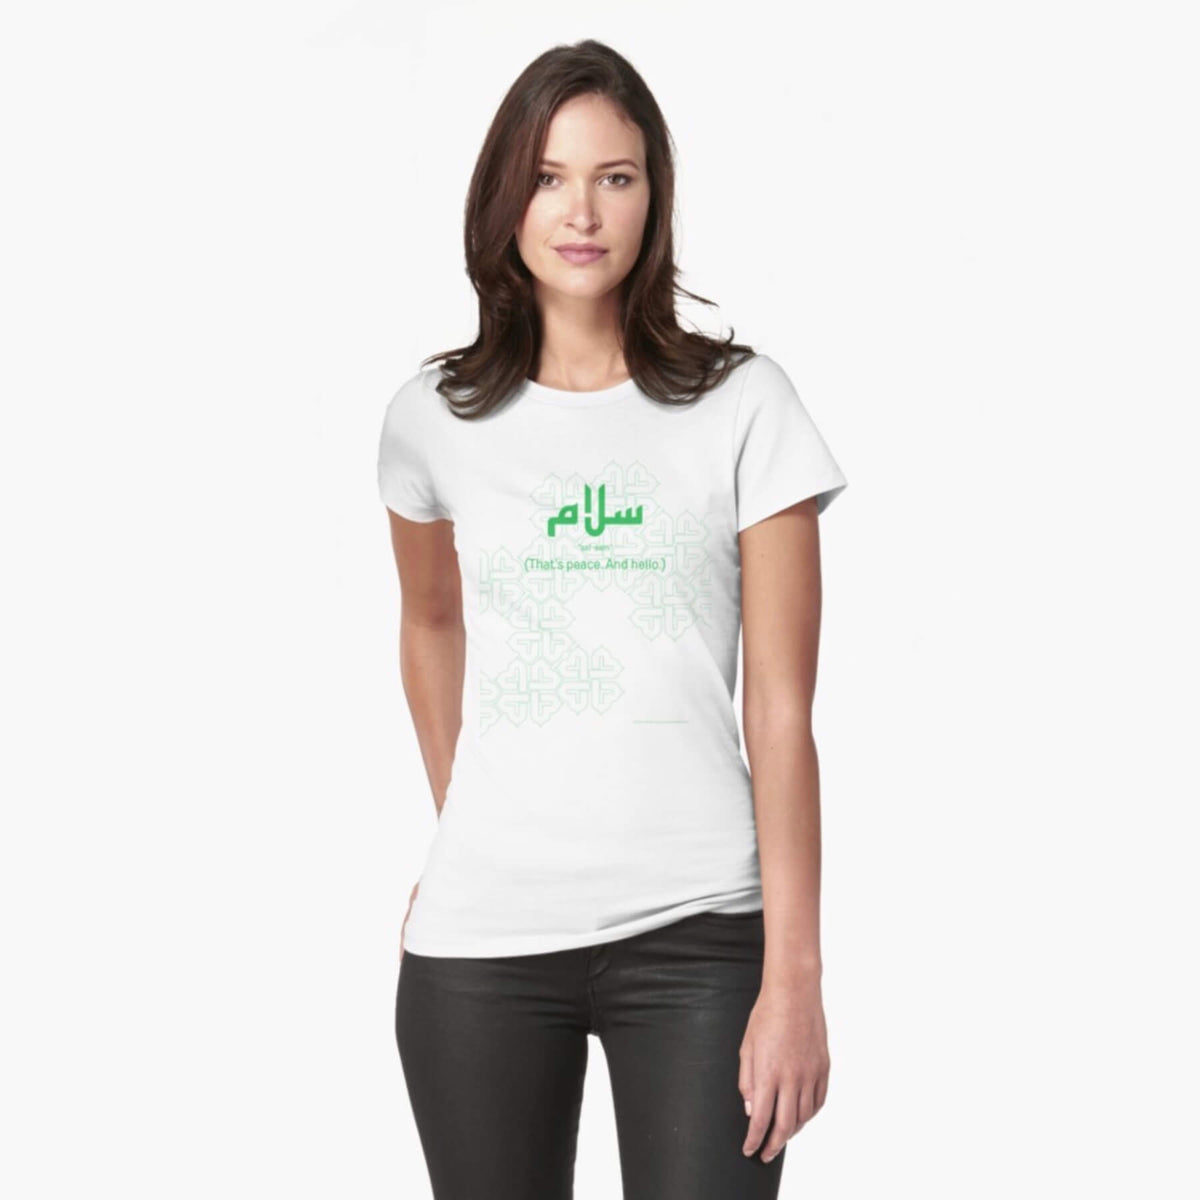 A white female model with hazel eyes and brown shoulder-length hair wears the Haluna Happy Names exclusive &#39;Salaam—Arabic Key Words&#39; design fitted t-shirt in white, and tight black jeans. The word &#39;salaam&#39; is written in green in Arabic with a kufic-style font, and beneath it in English the words &quot;Sal-aam&quot; and beneath that the words &#39;(That means peace. And hello)&#39;. The text is positioned on the tshirt so it falls across the chest of the model against a complementary green background pattern.